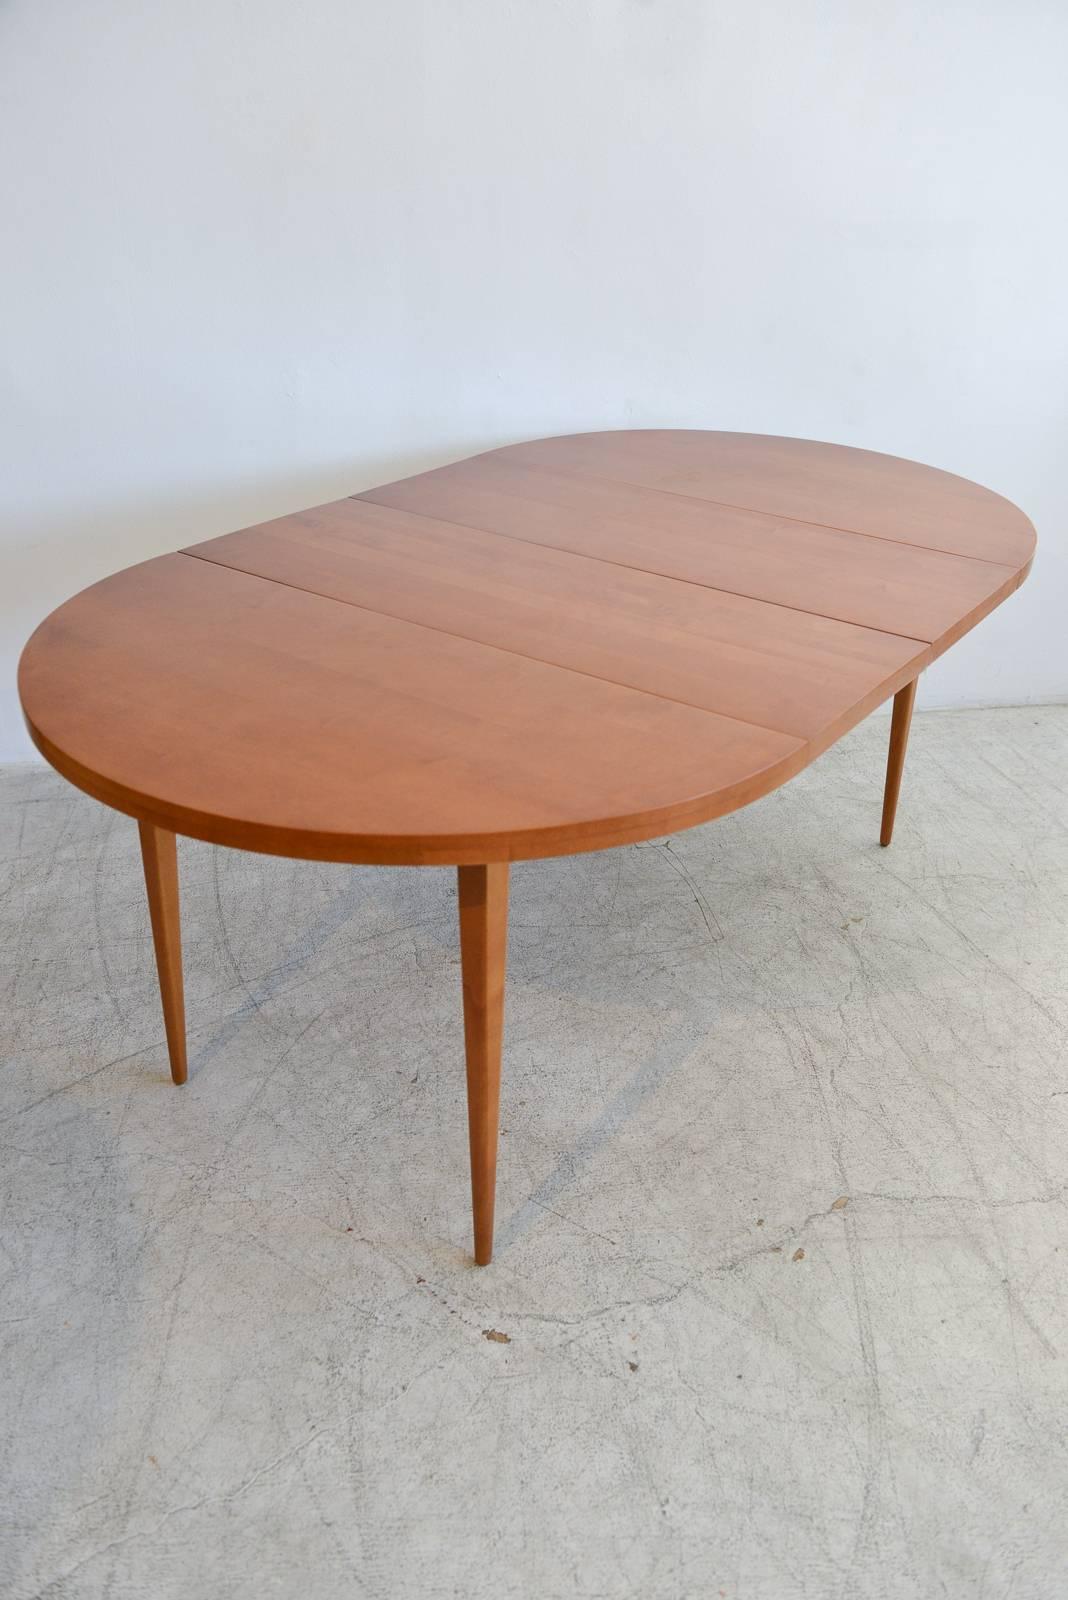 American Paul McCobb Round Maple Dining Table with Two Extensions, circa 1955